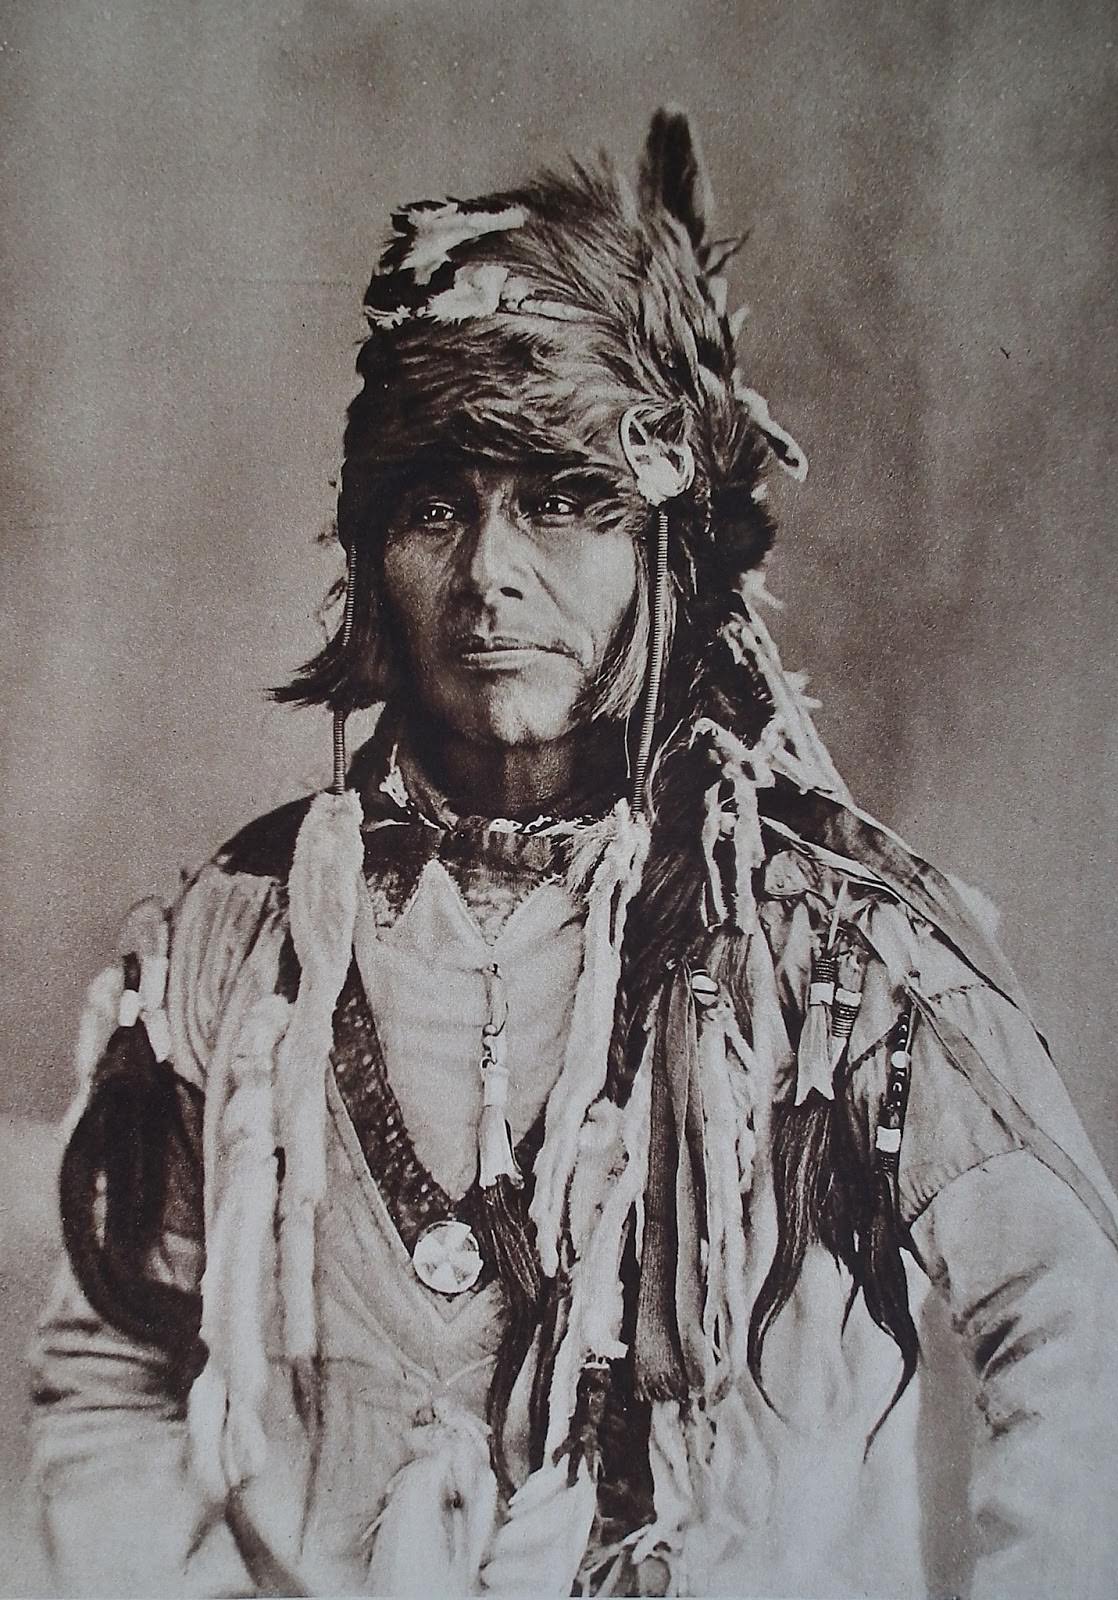 A Canadian Cree Indian.